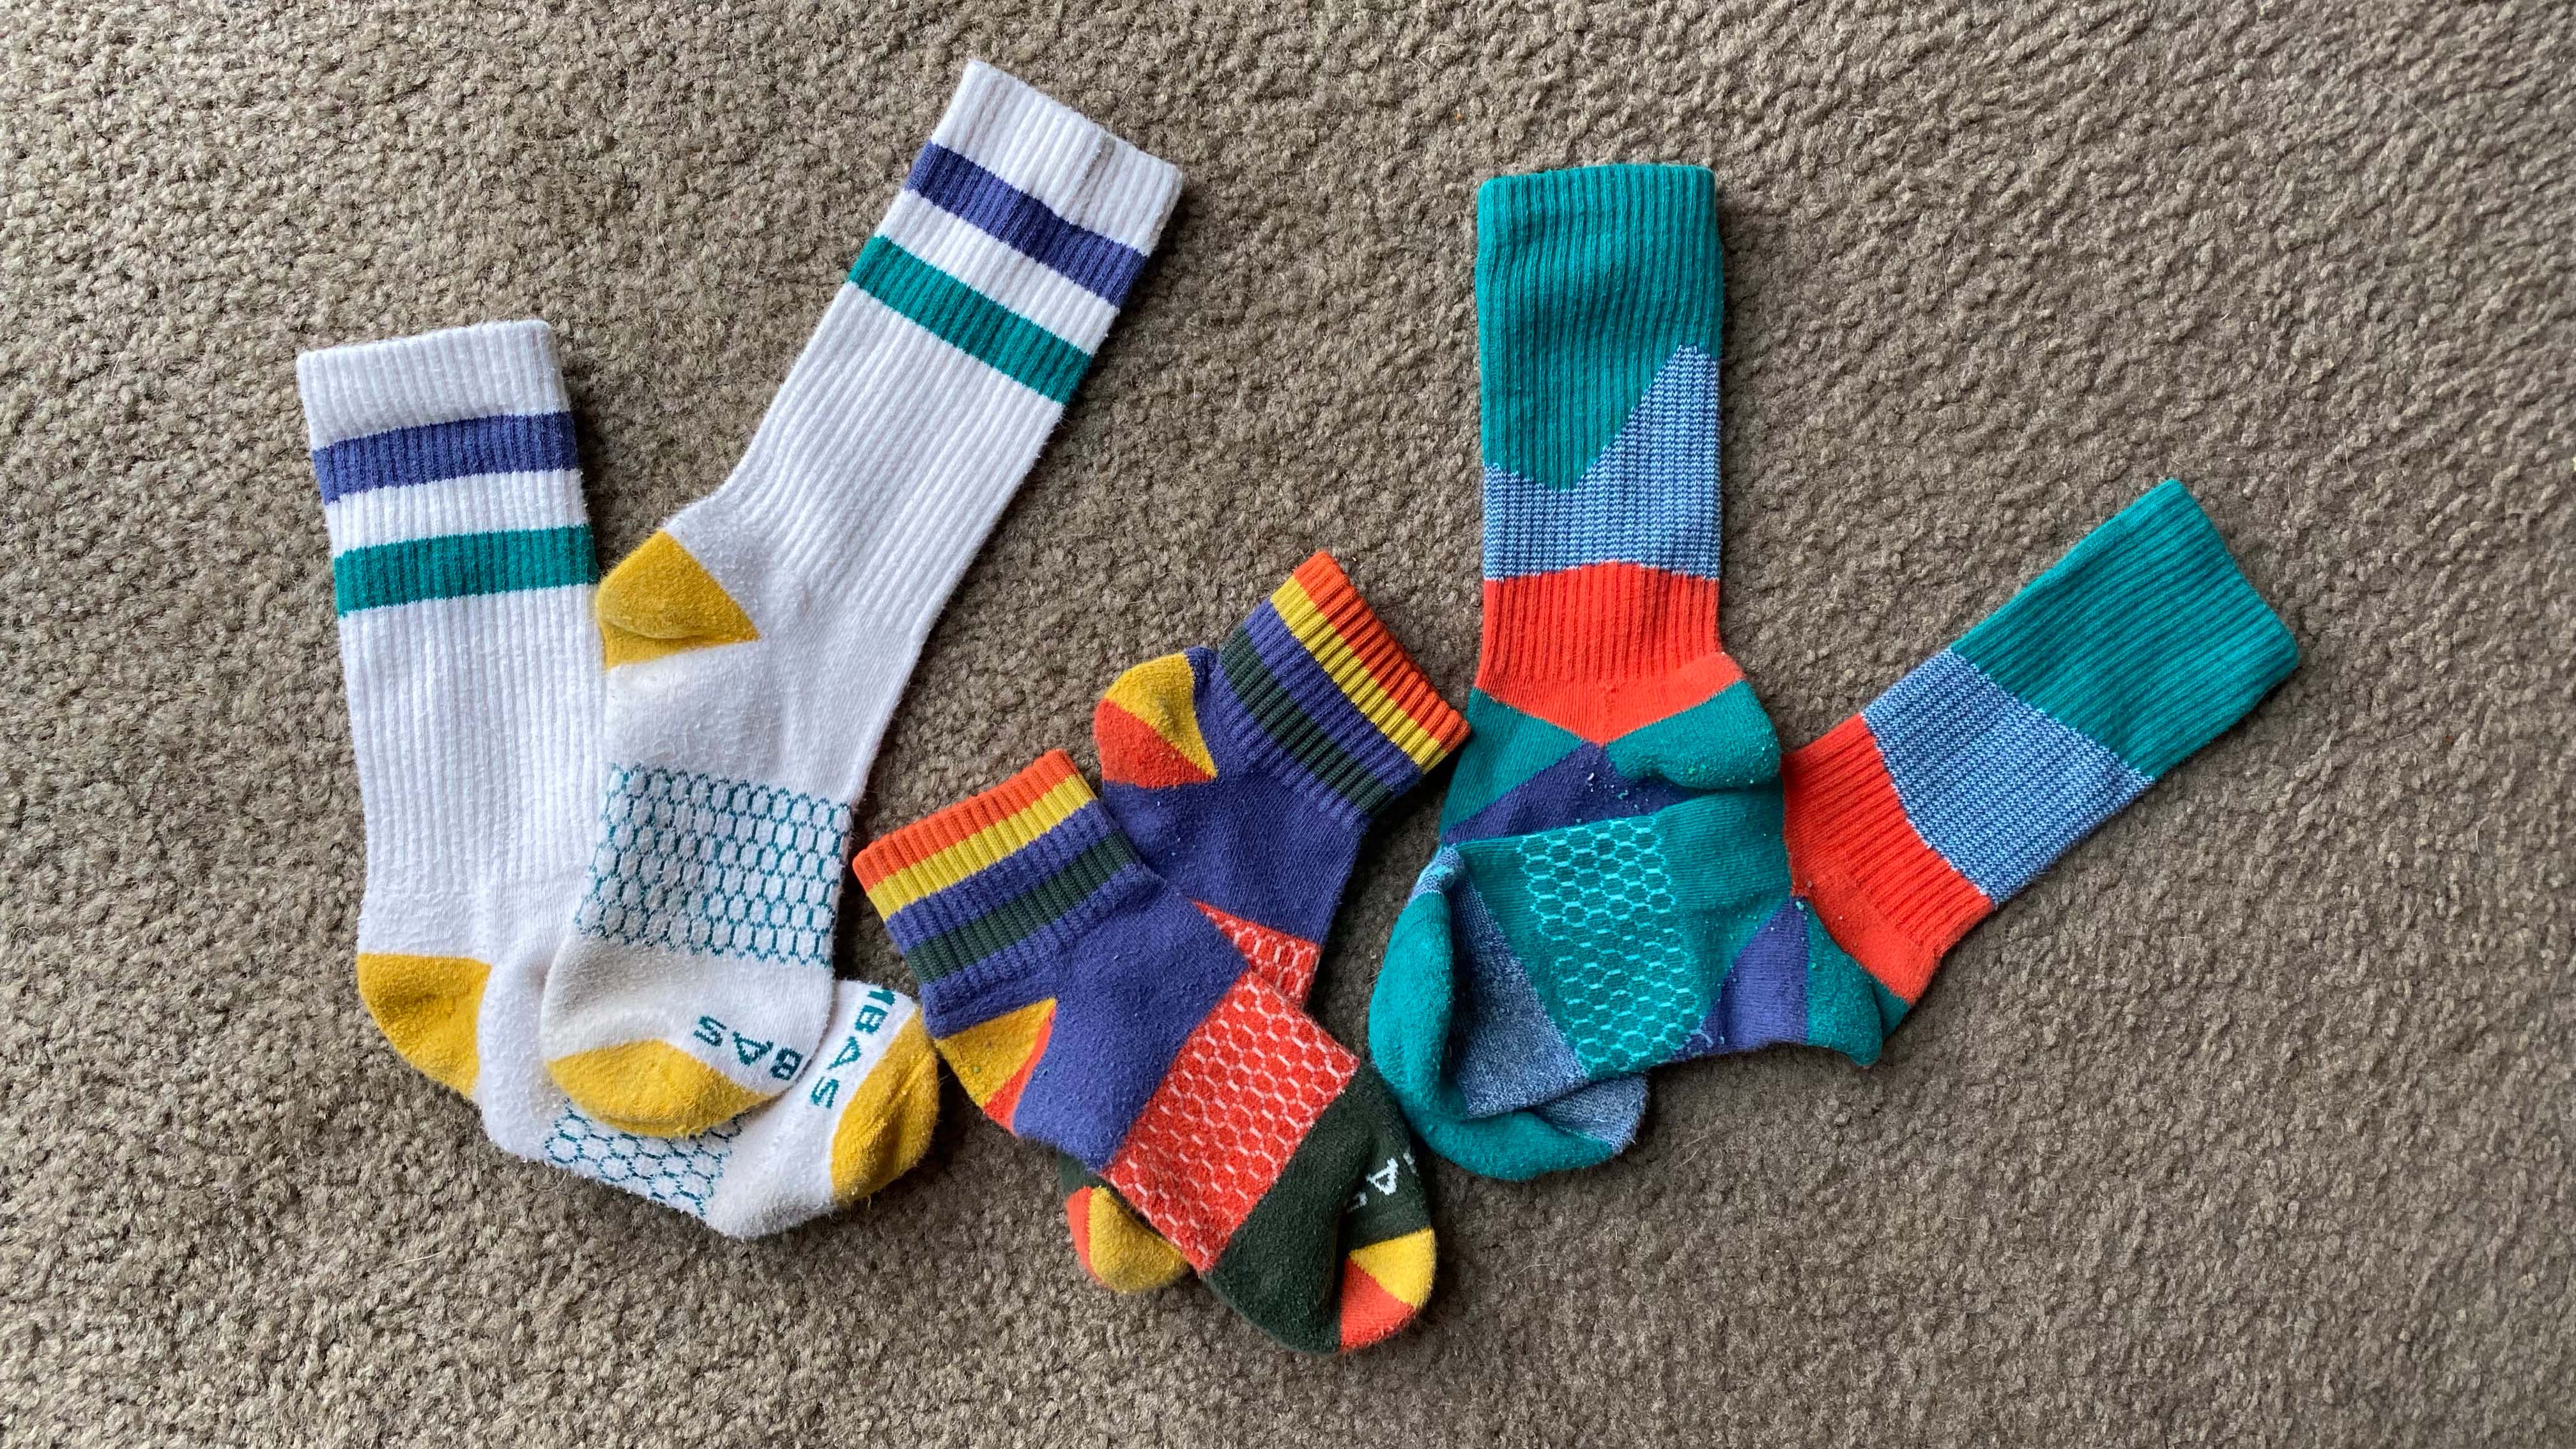 The coziest socks our editors have actually worn | CNN Underscored